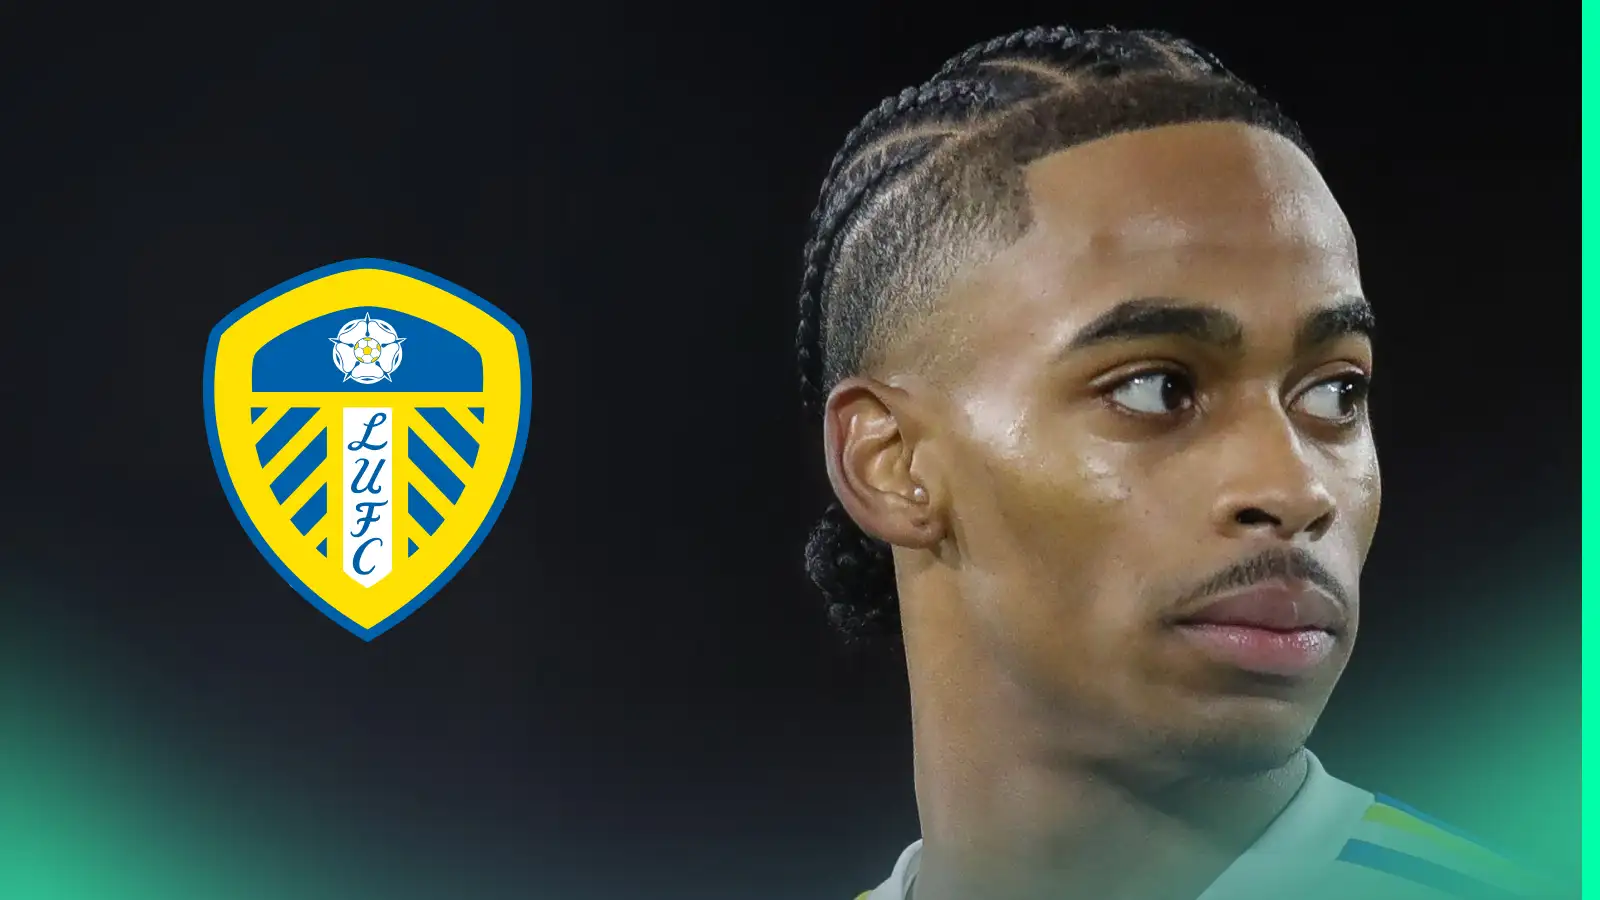 Elite Leeds talent tipped to make record-breaking transfer to title-winning side as star spells out future goals